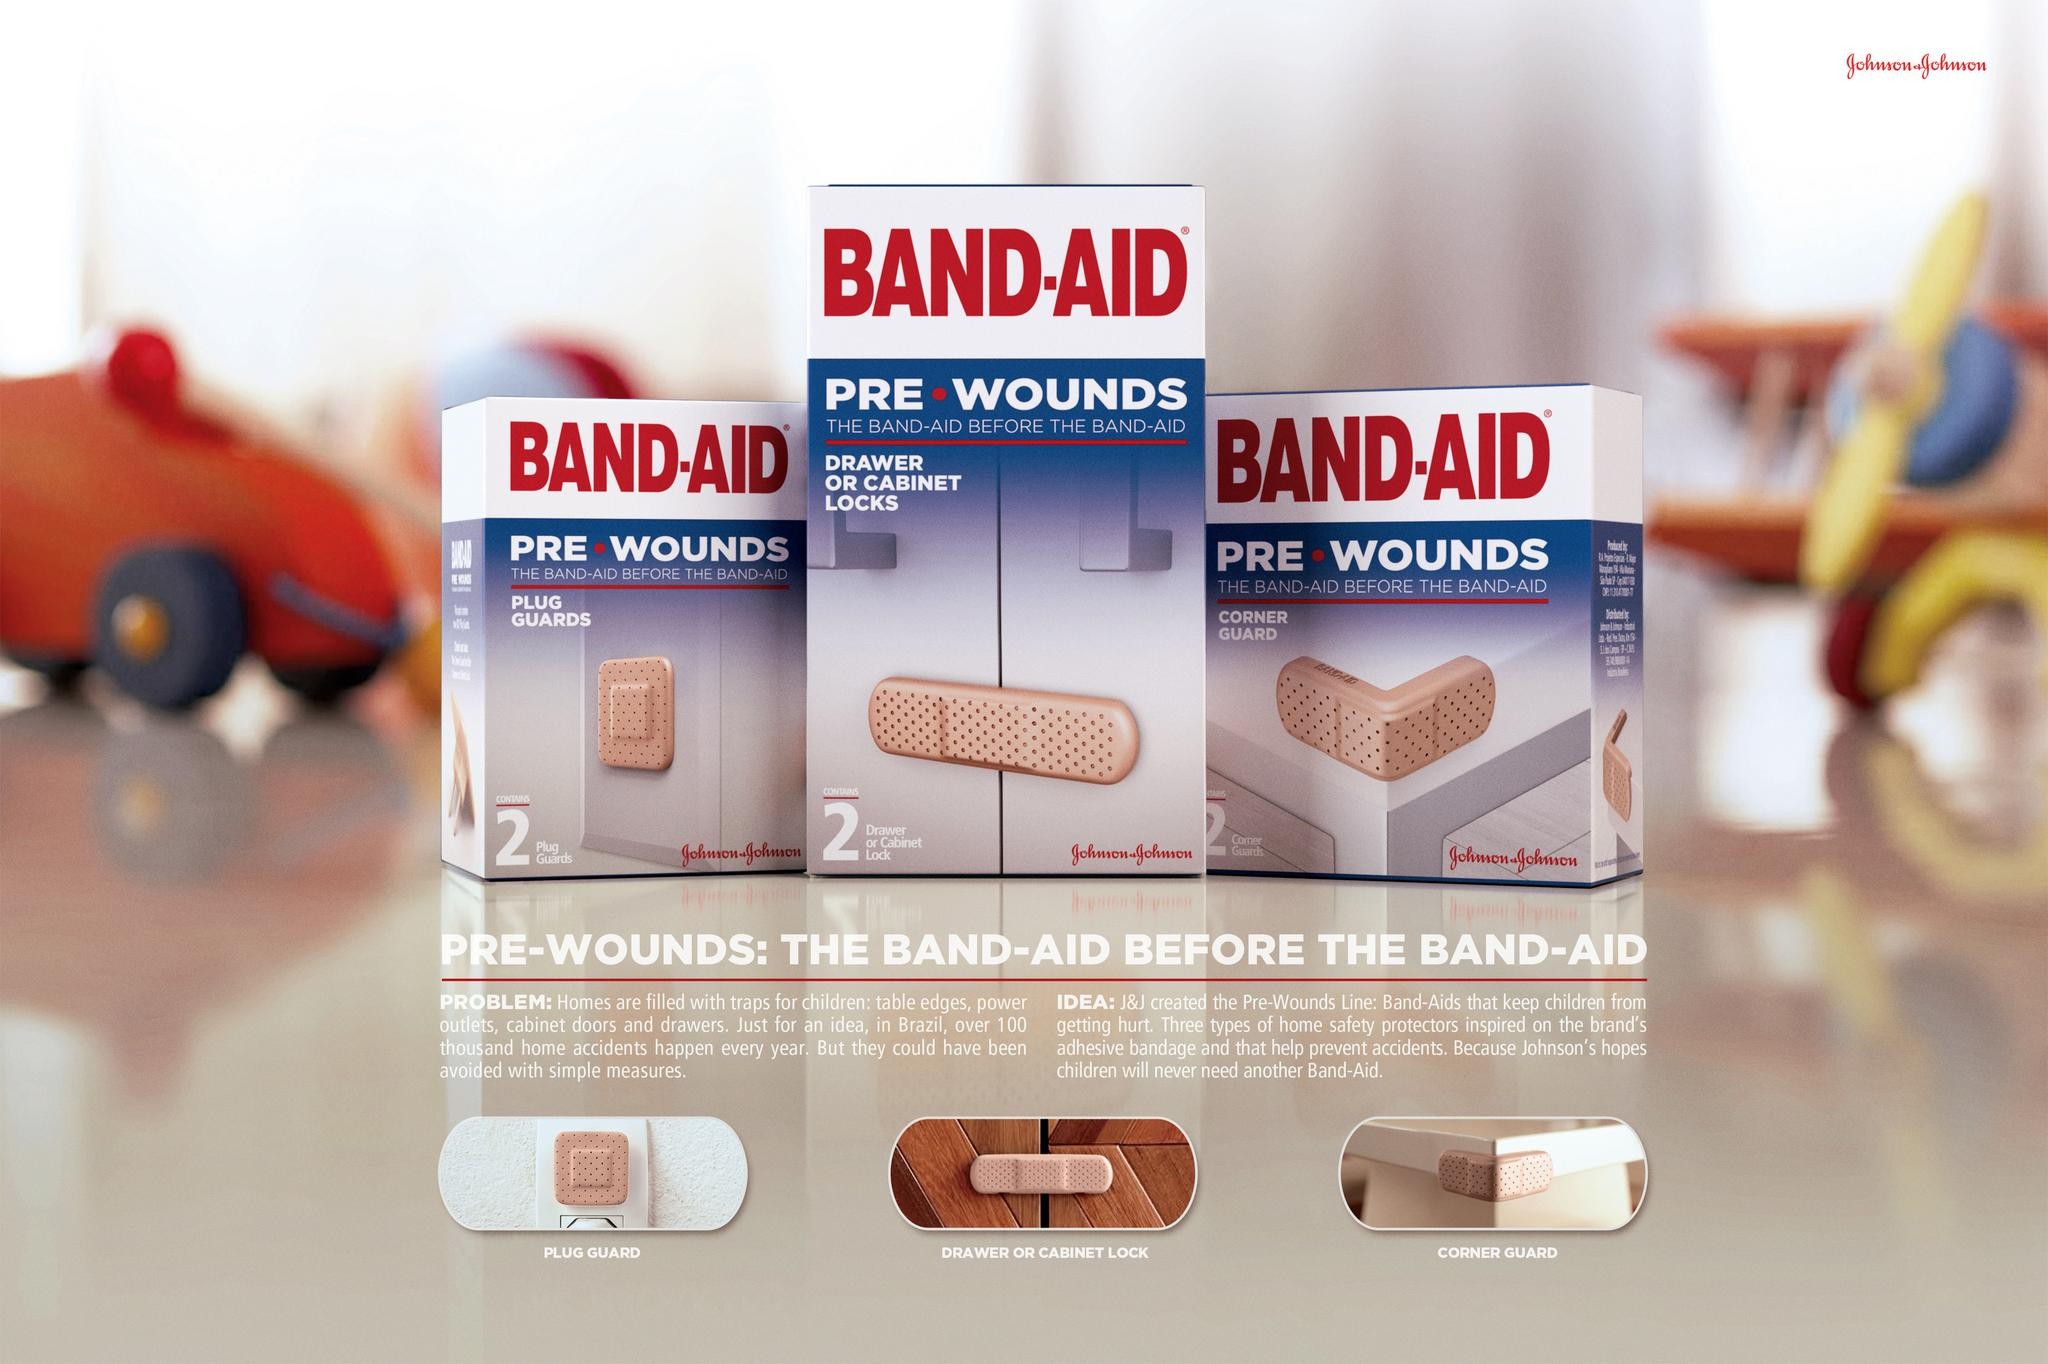 BAND-AID PRE-WOUNDS